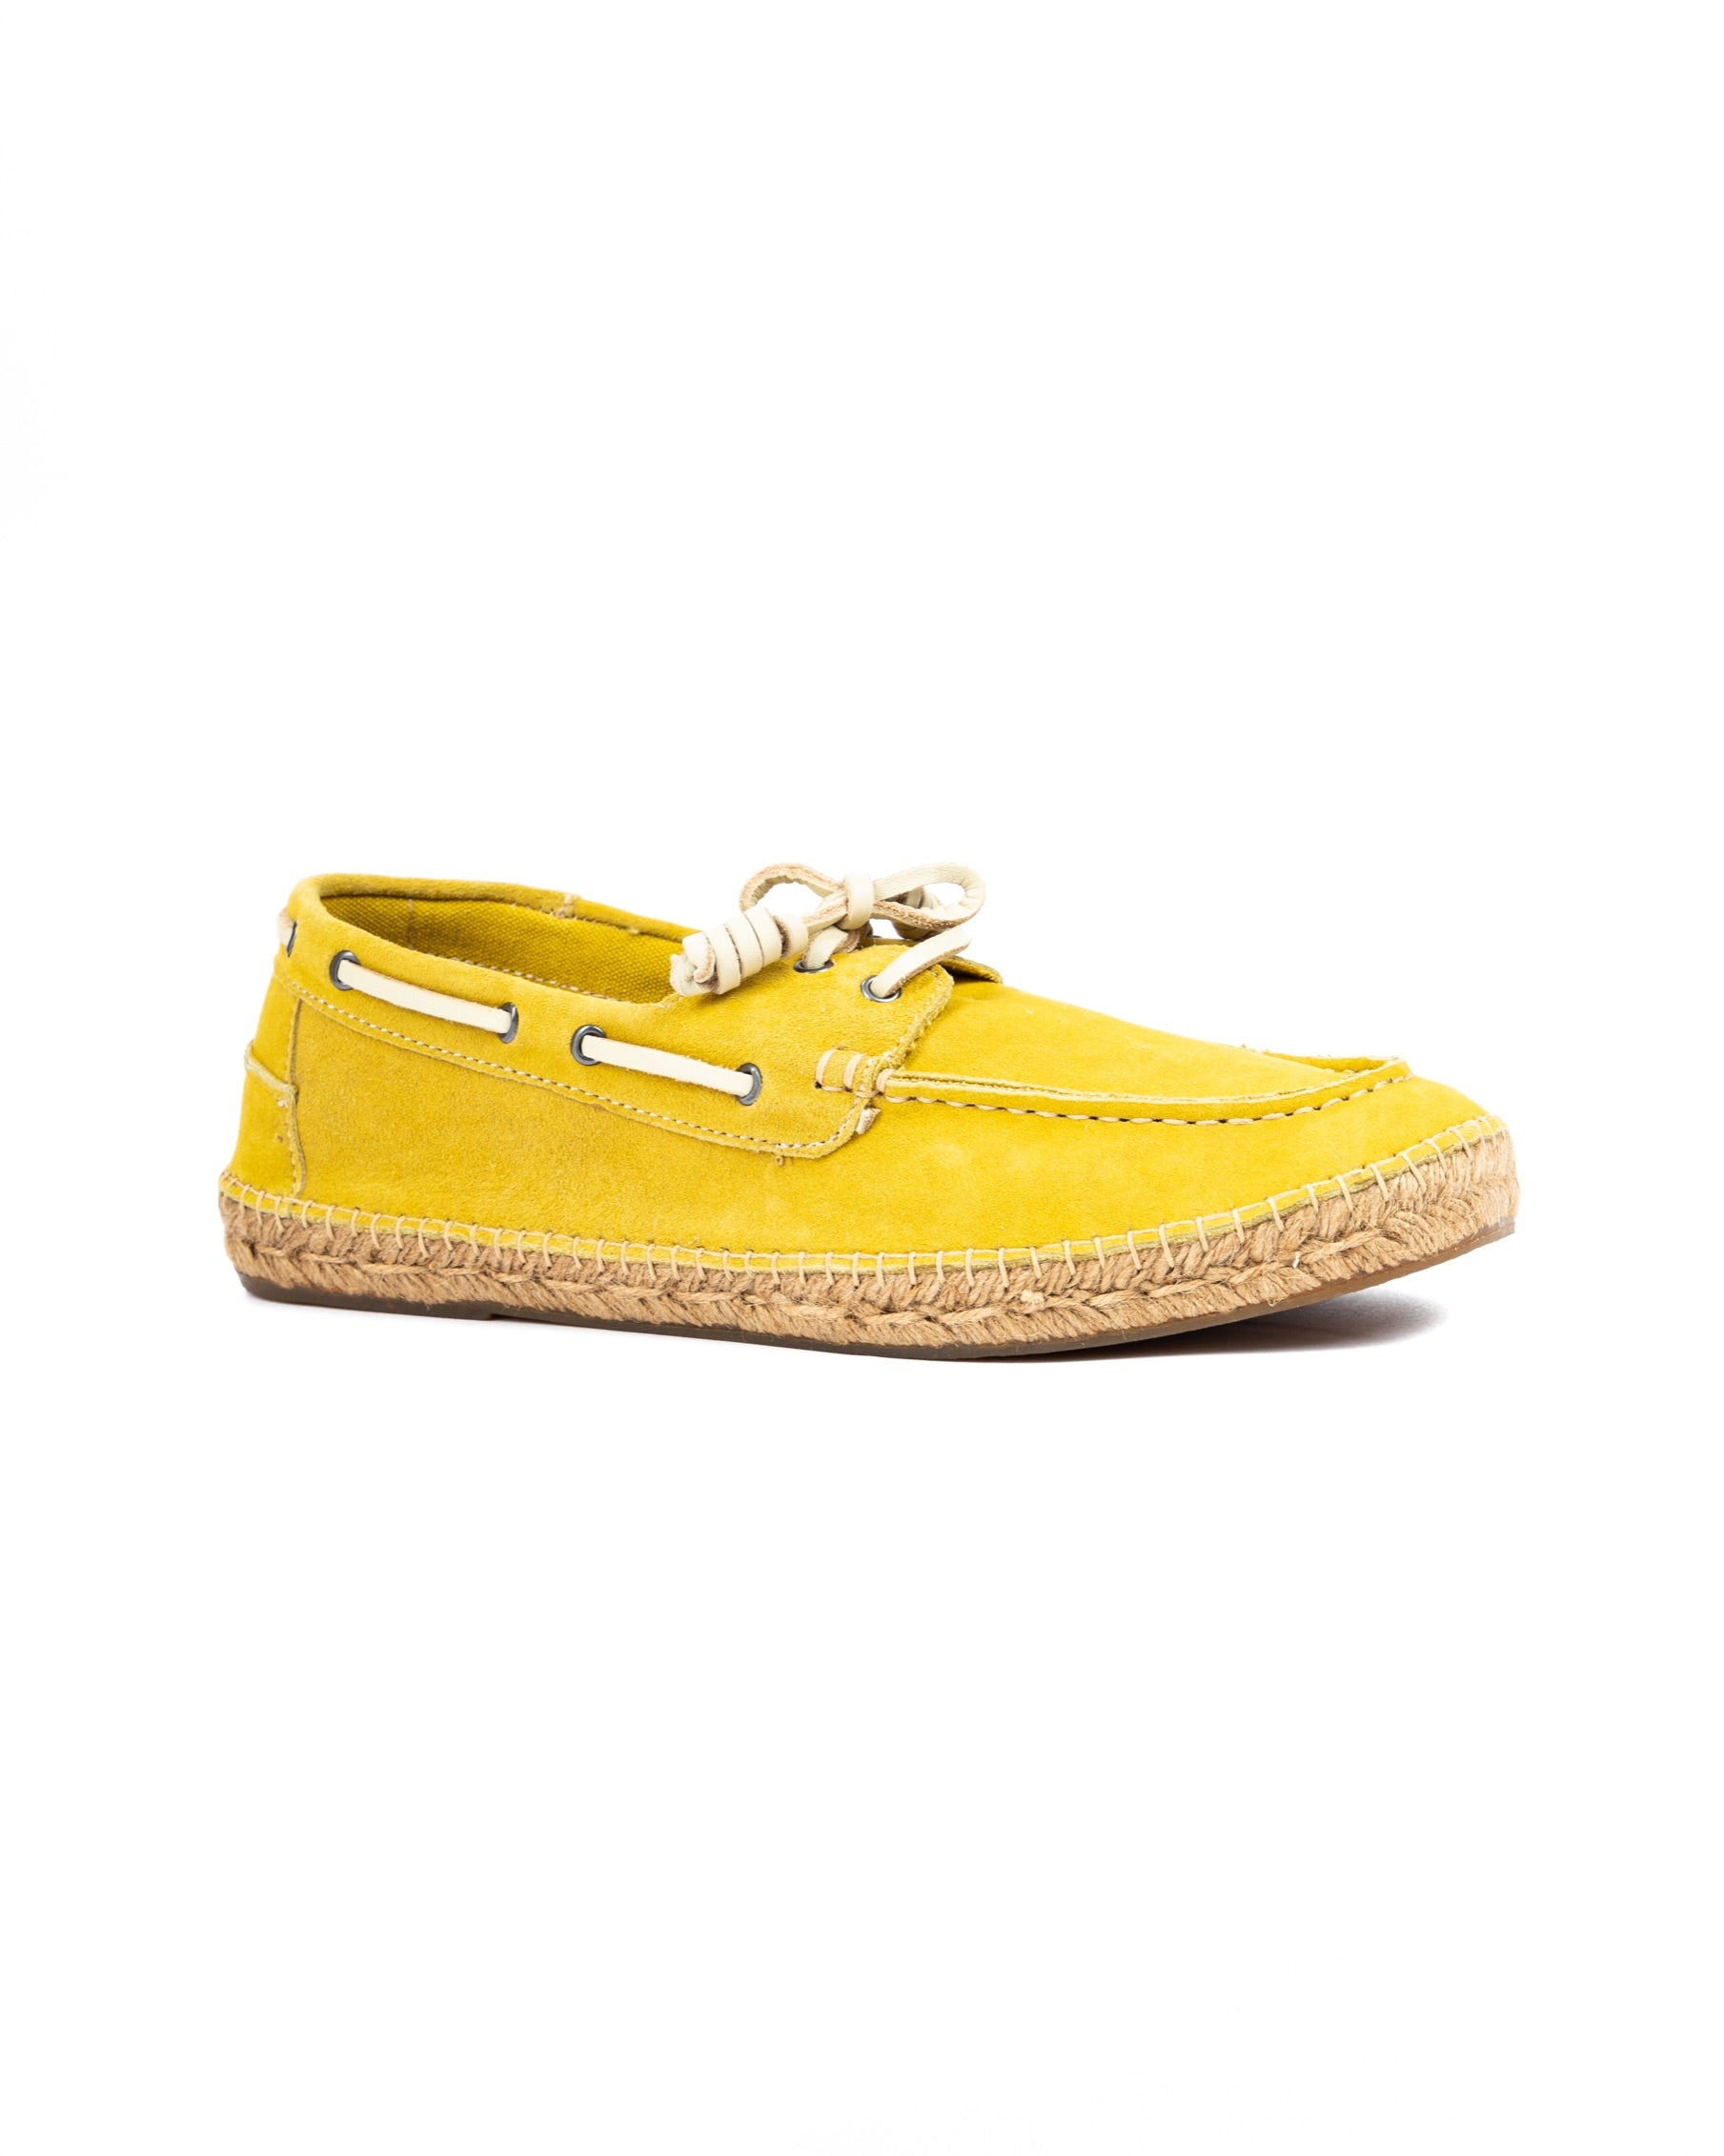 Pompeii - yellow suede boat with rope bottom